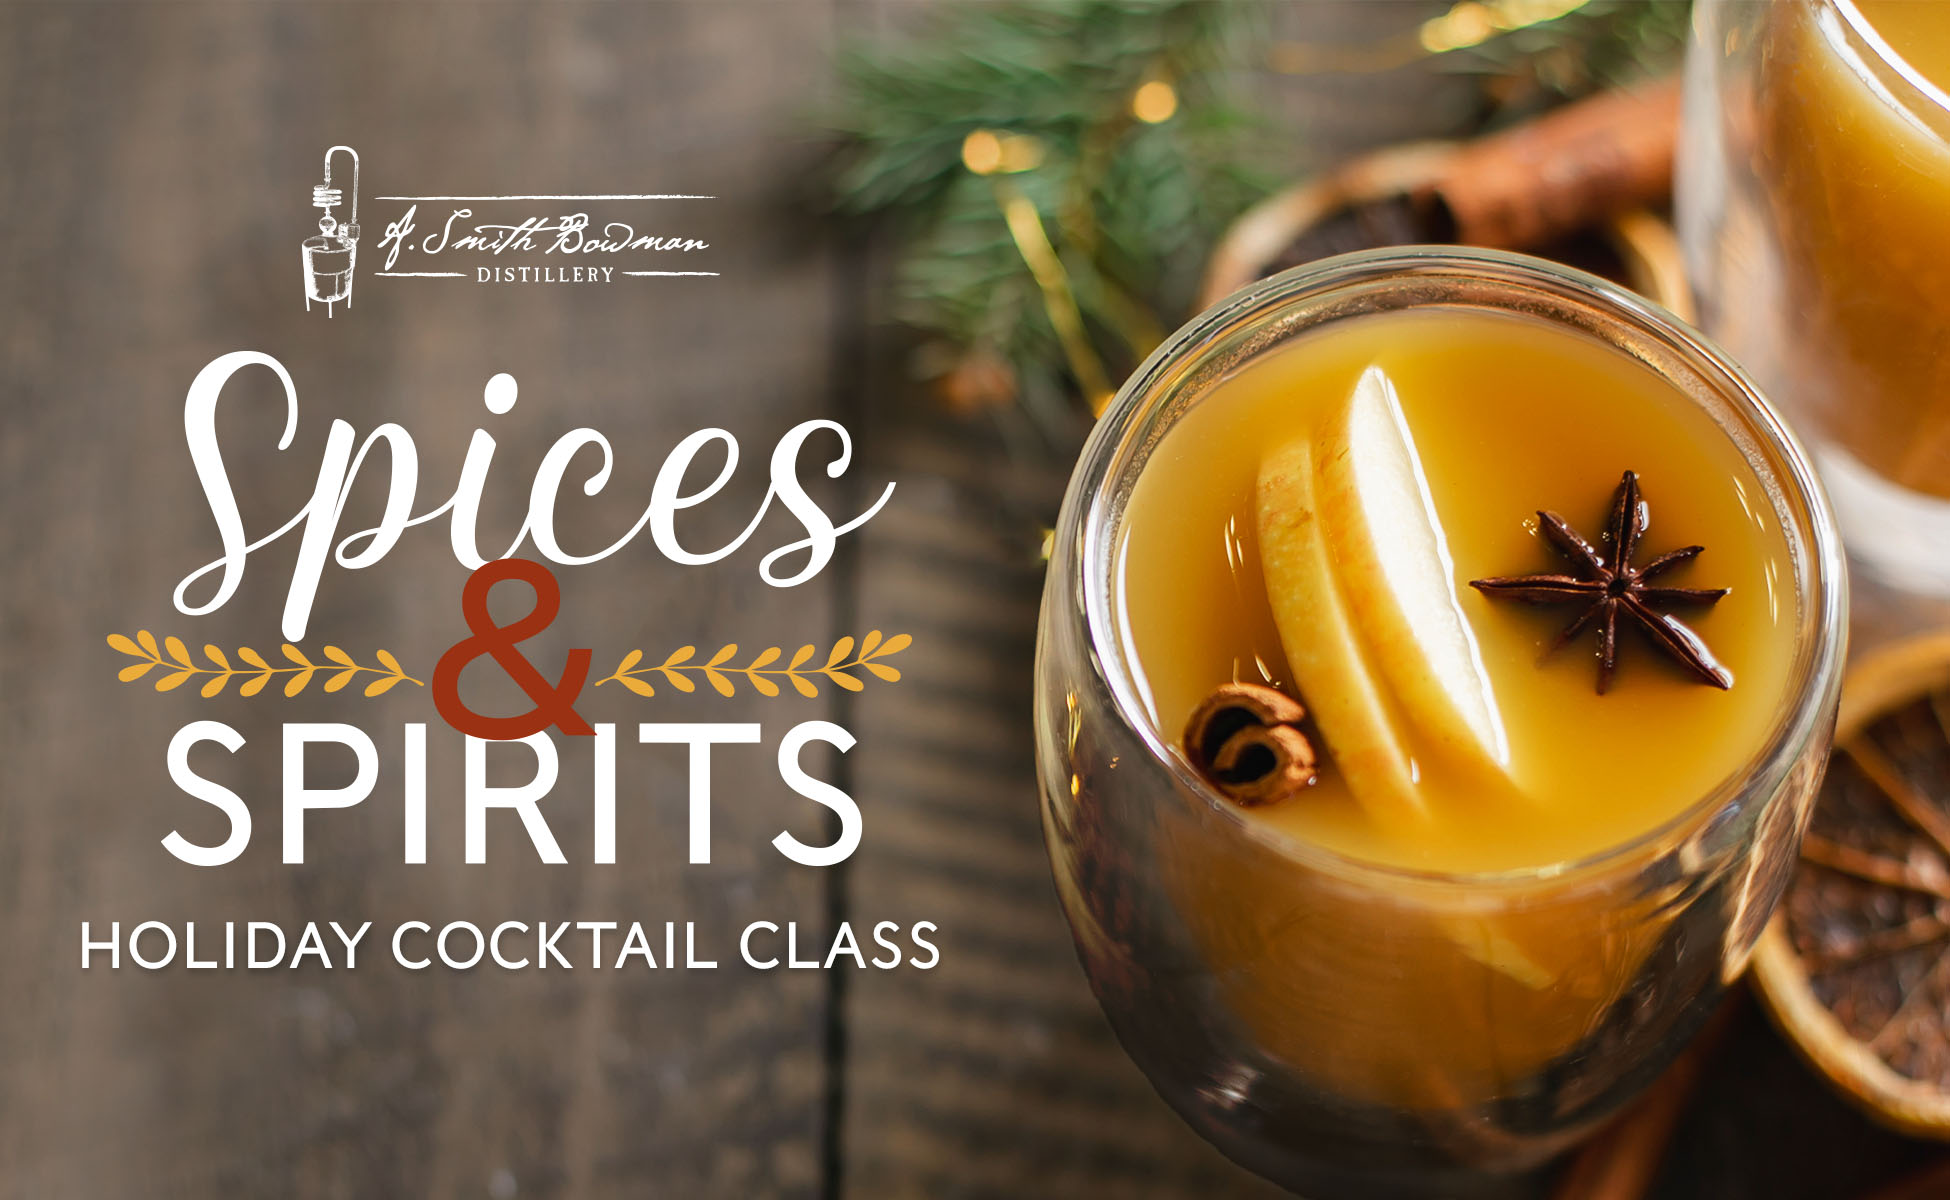 Spices & Spirits Holiday Cocktail Class at A. Smith Bowman Distillery